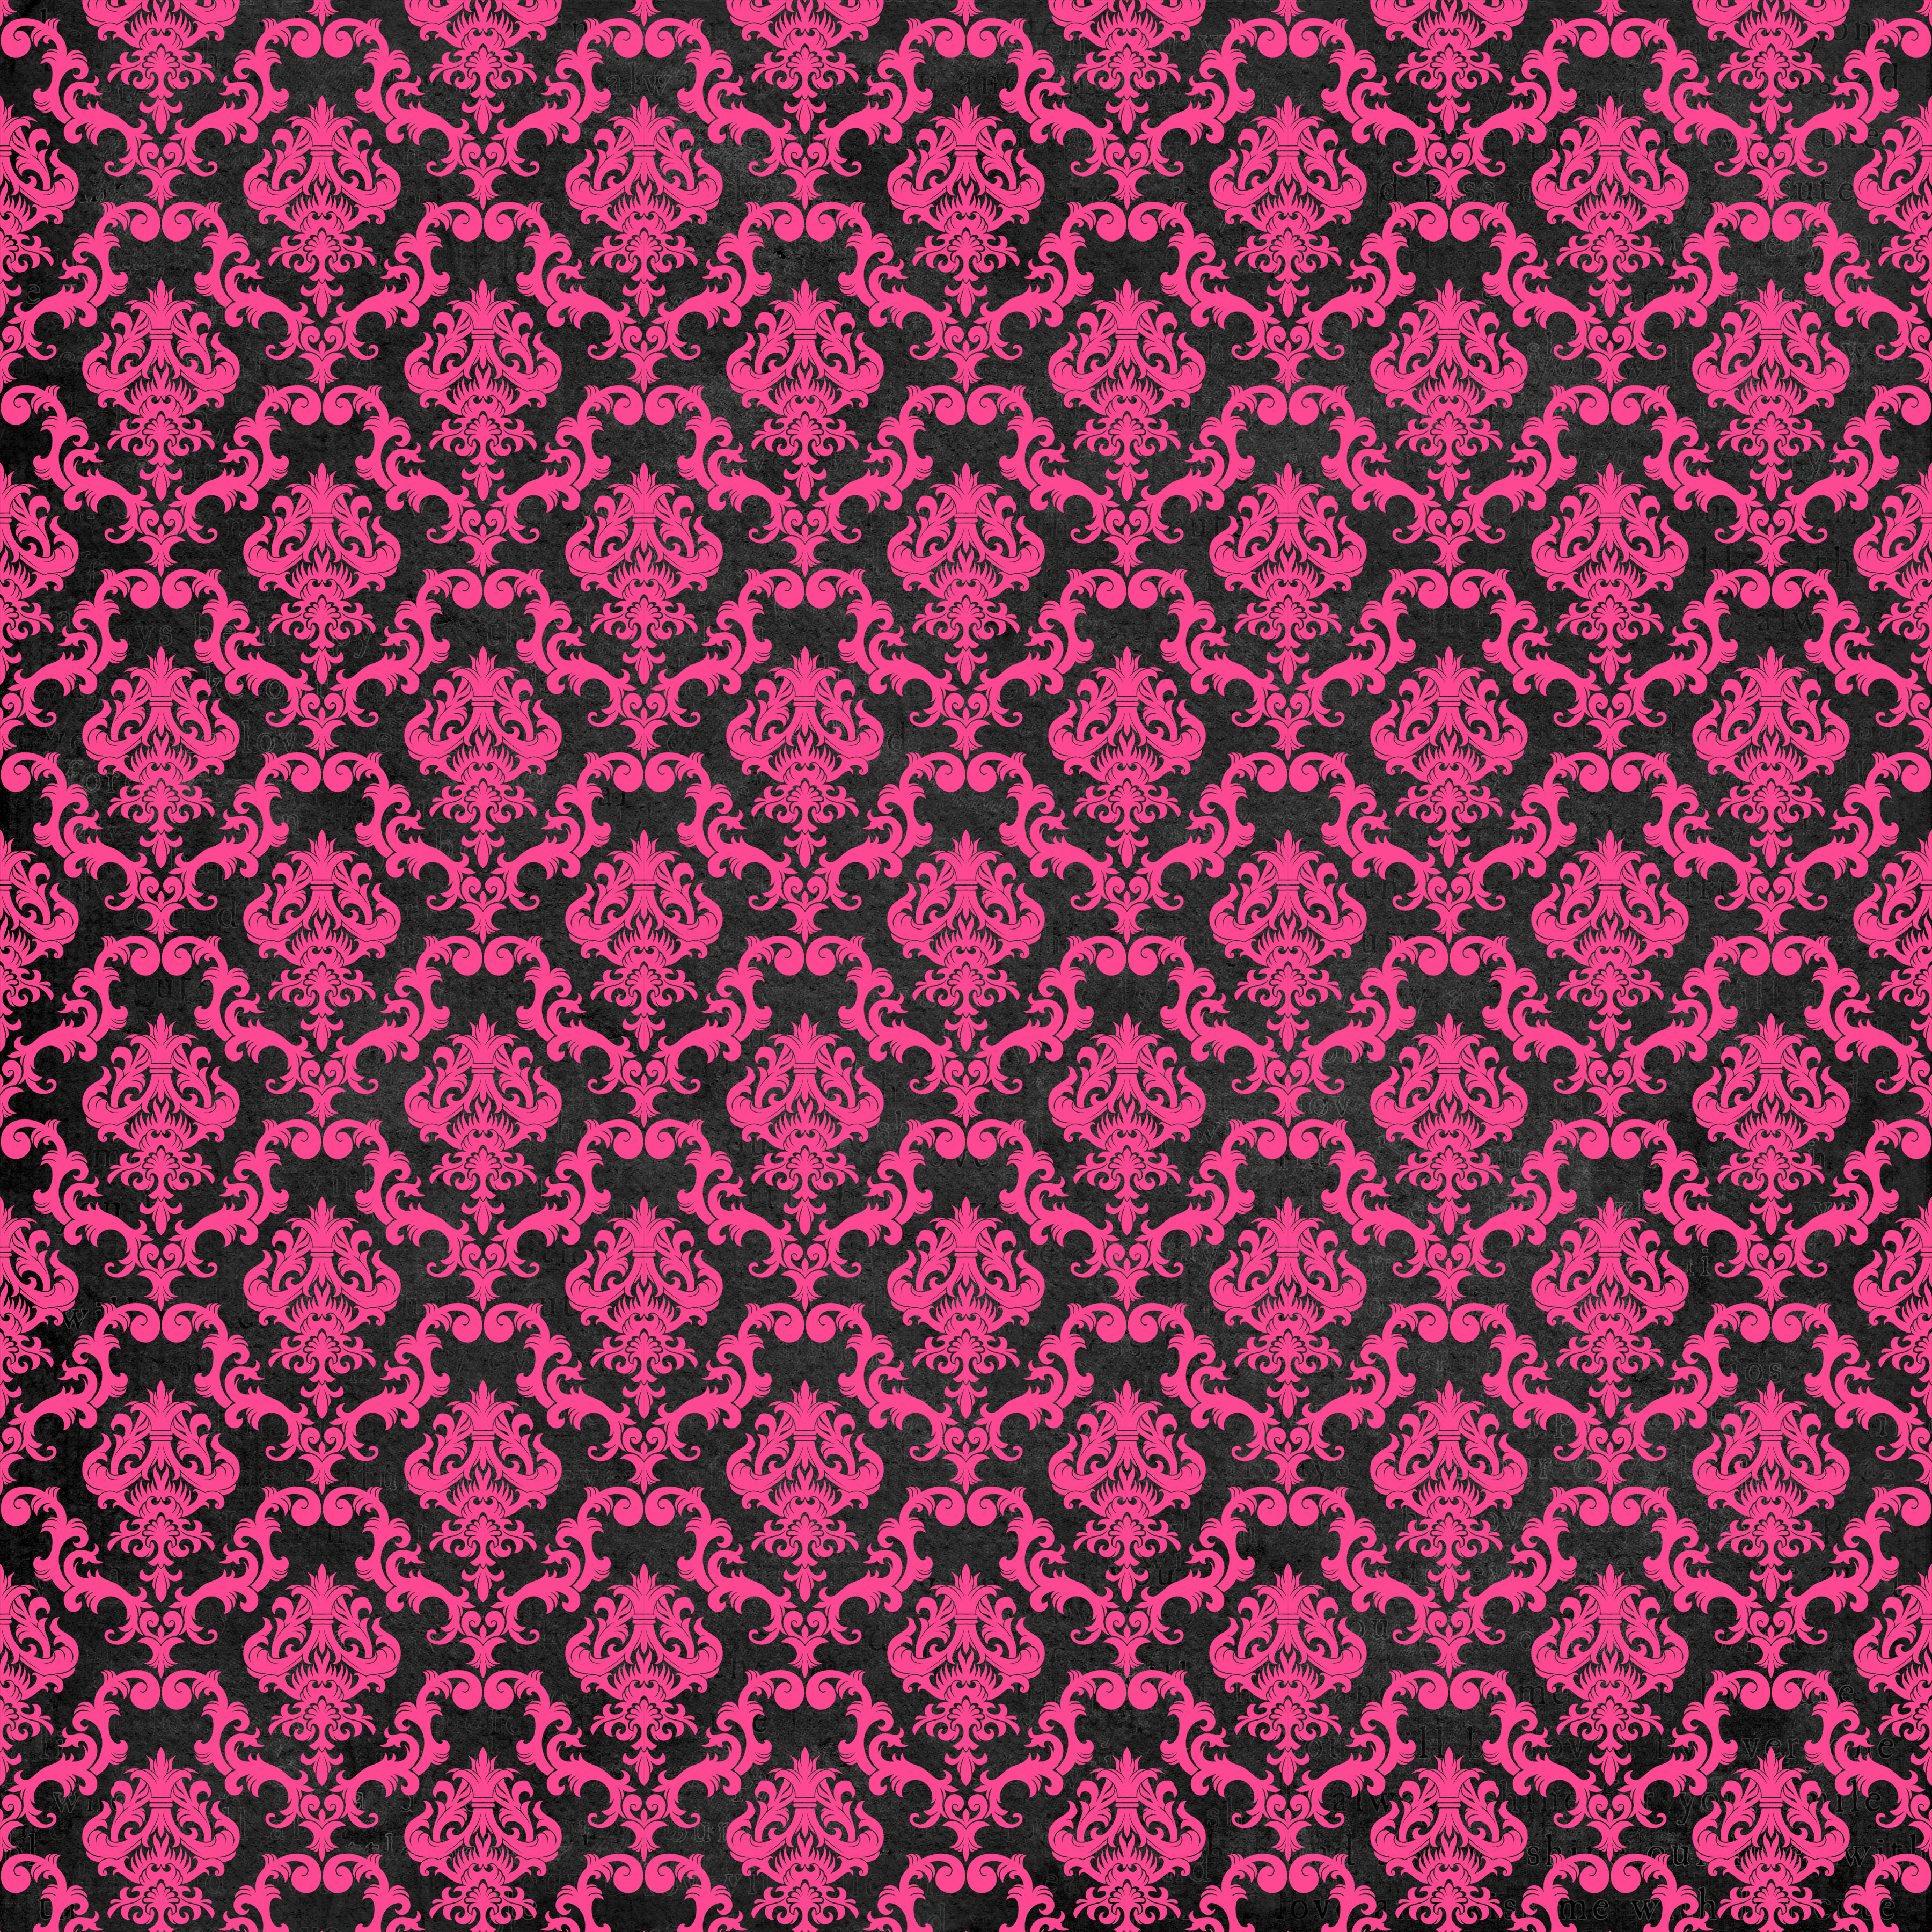 Related Pictures Damask Pink And Black Mobile Wallpaper